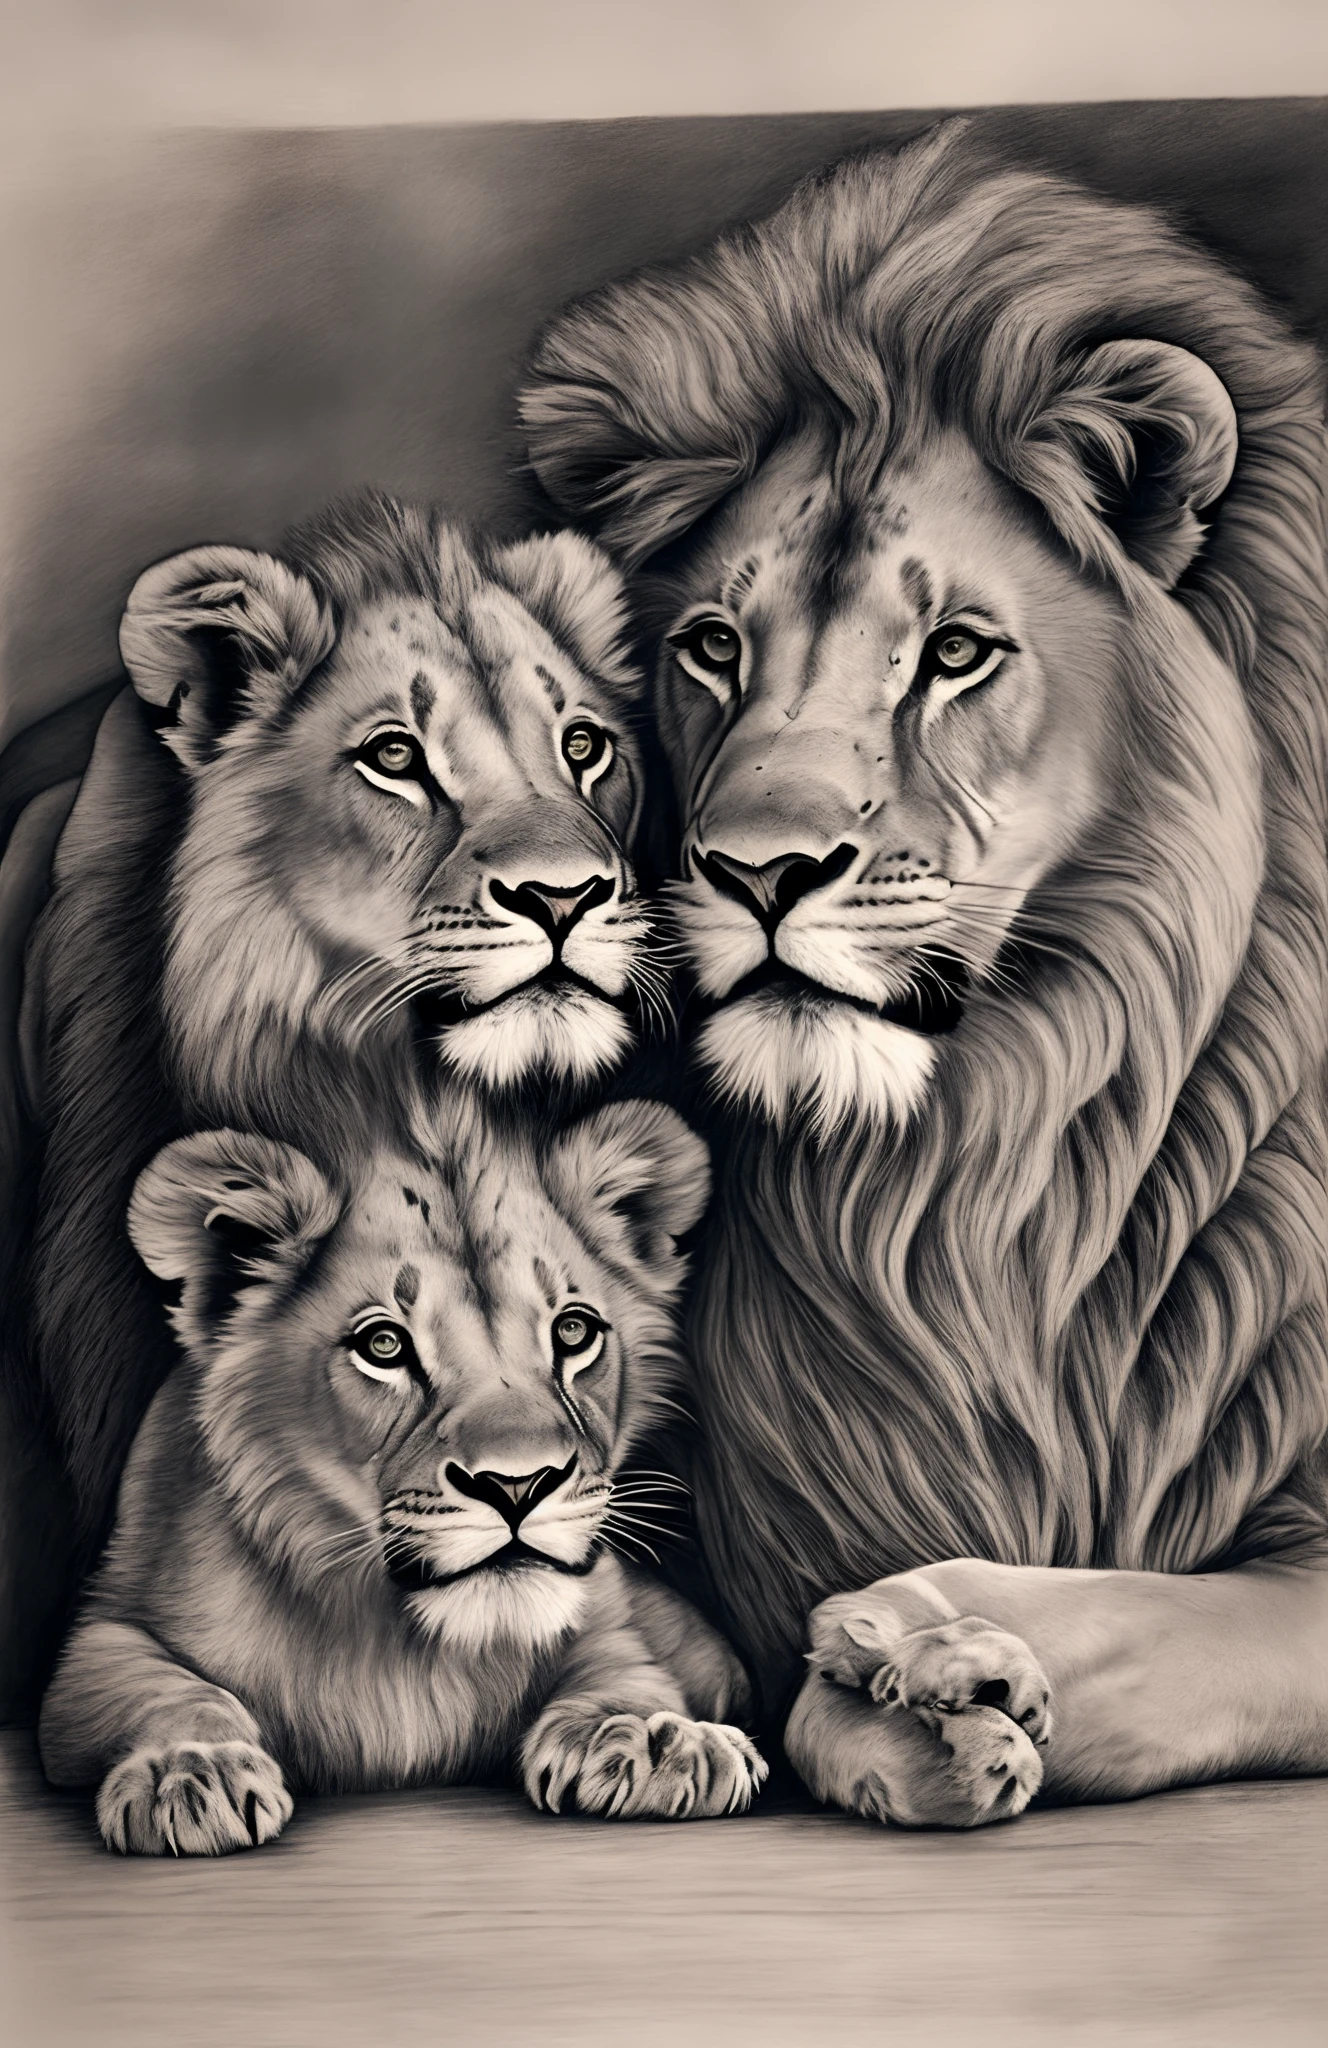 Lion Cubs Pencil drawing by Bethany Taylor | Artfinder